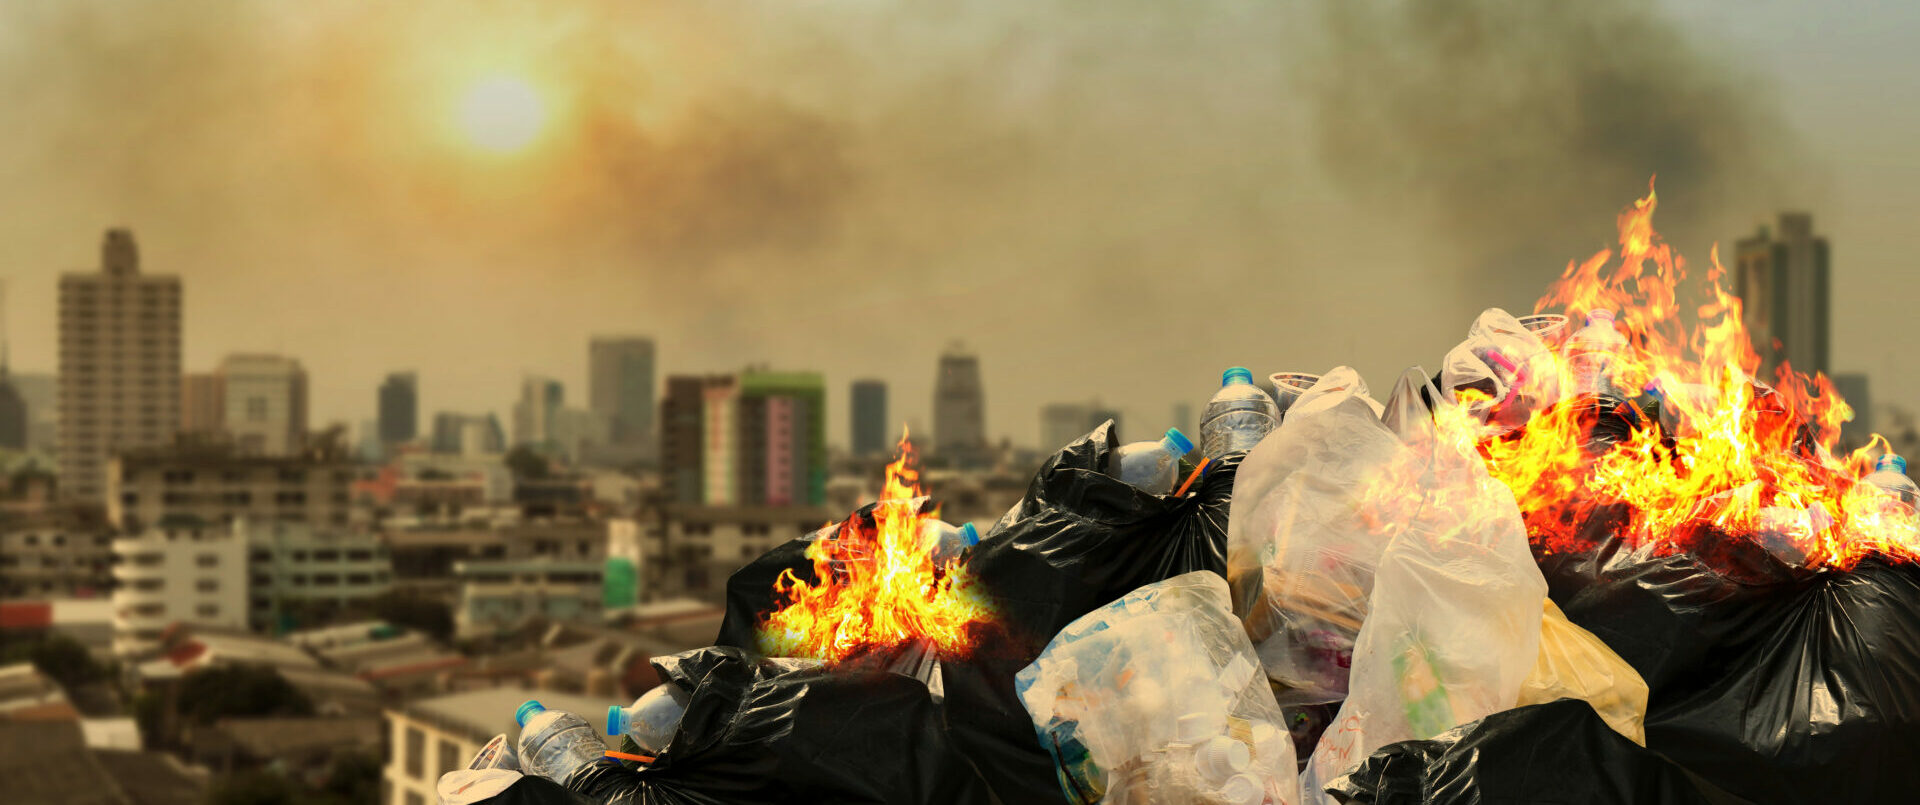 Garbage pile on fire with city in the background